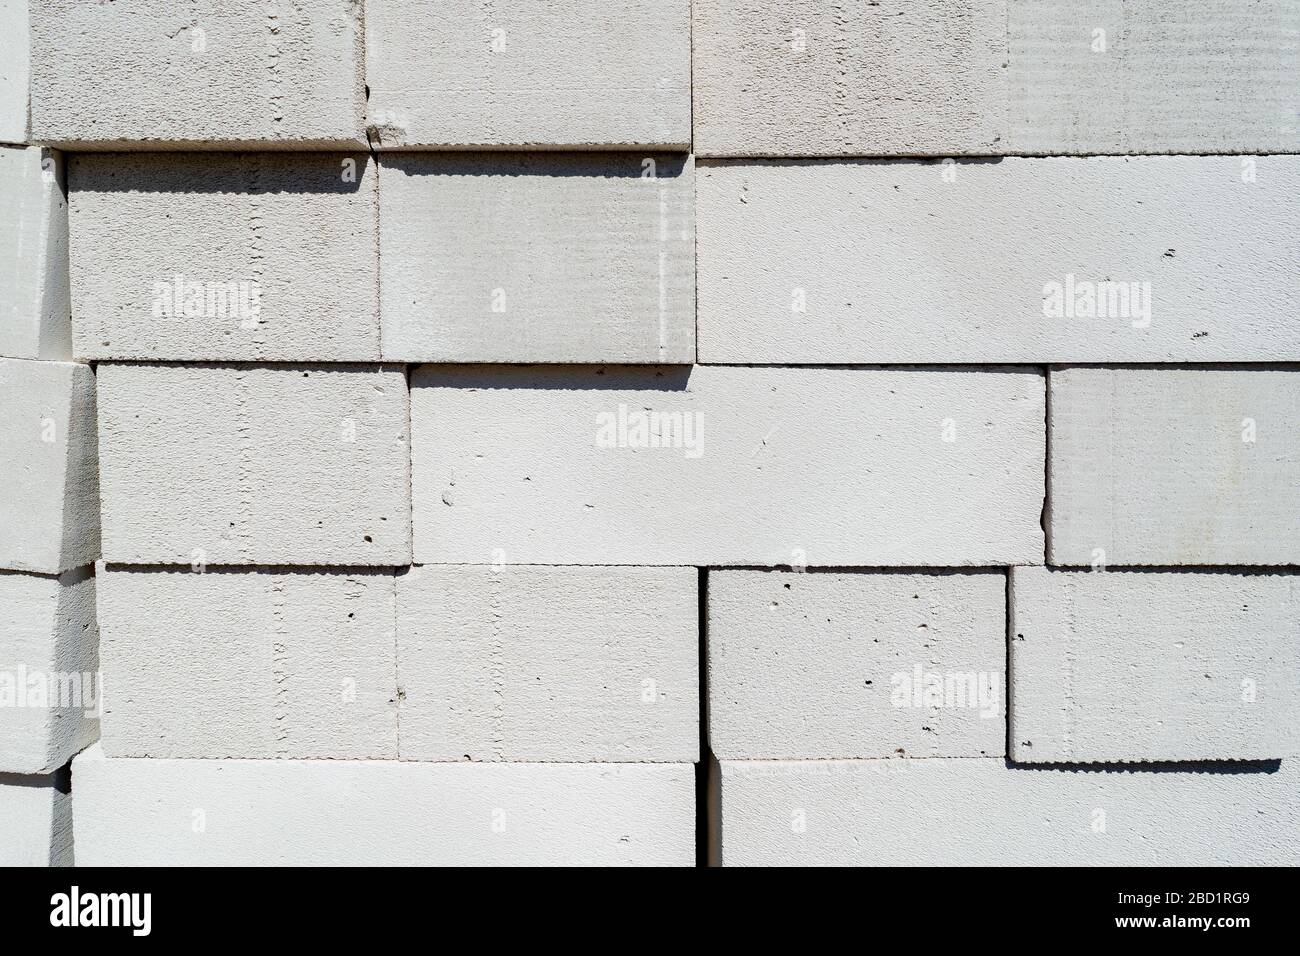 blocks of cellular concrete are stacked in a pile Stock Photo